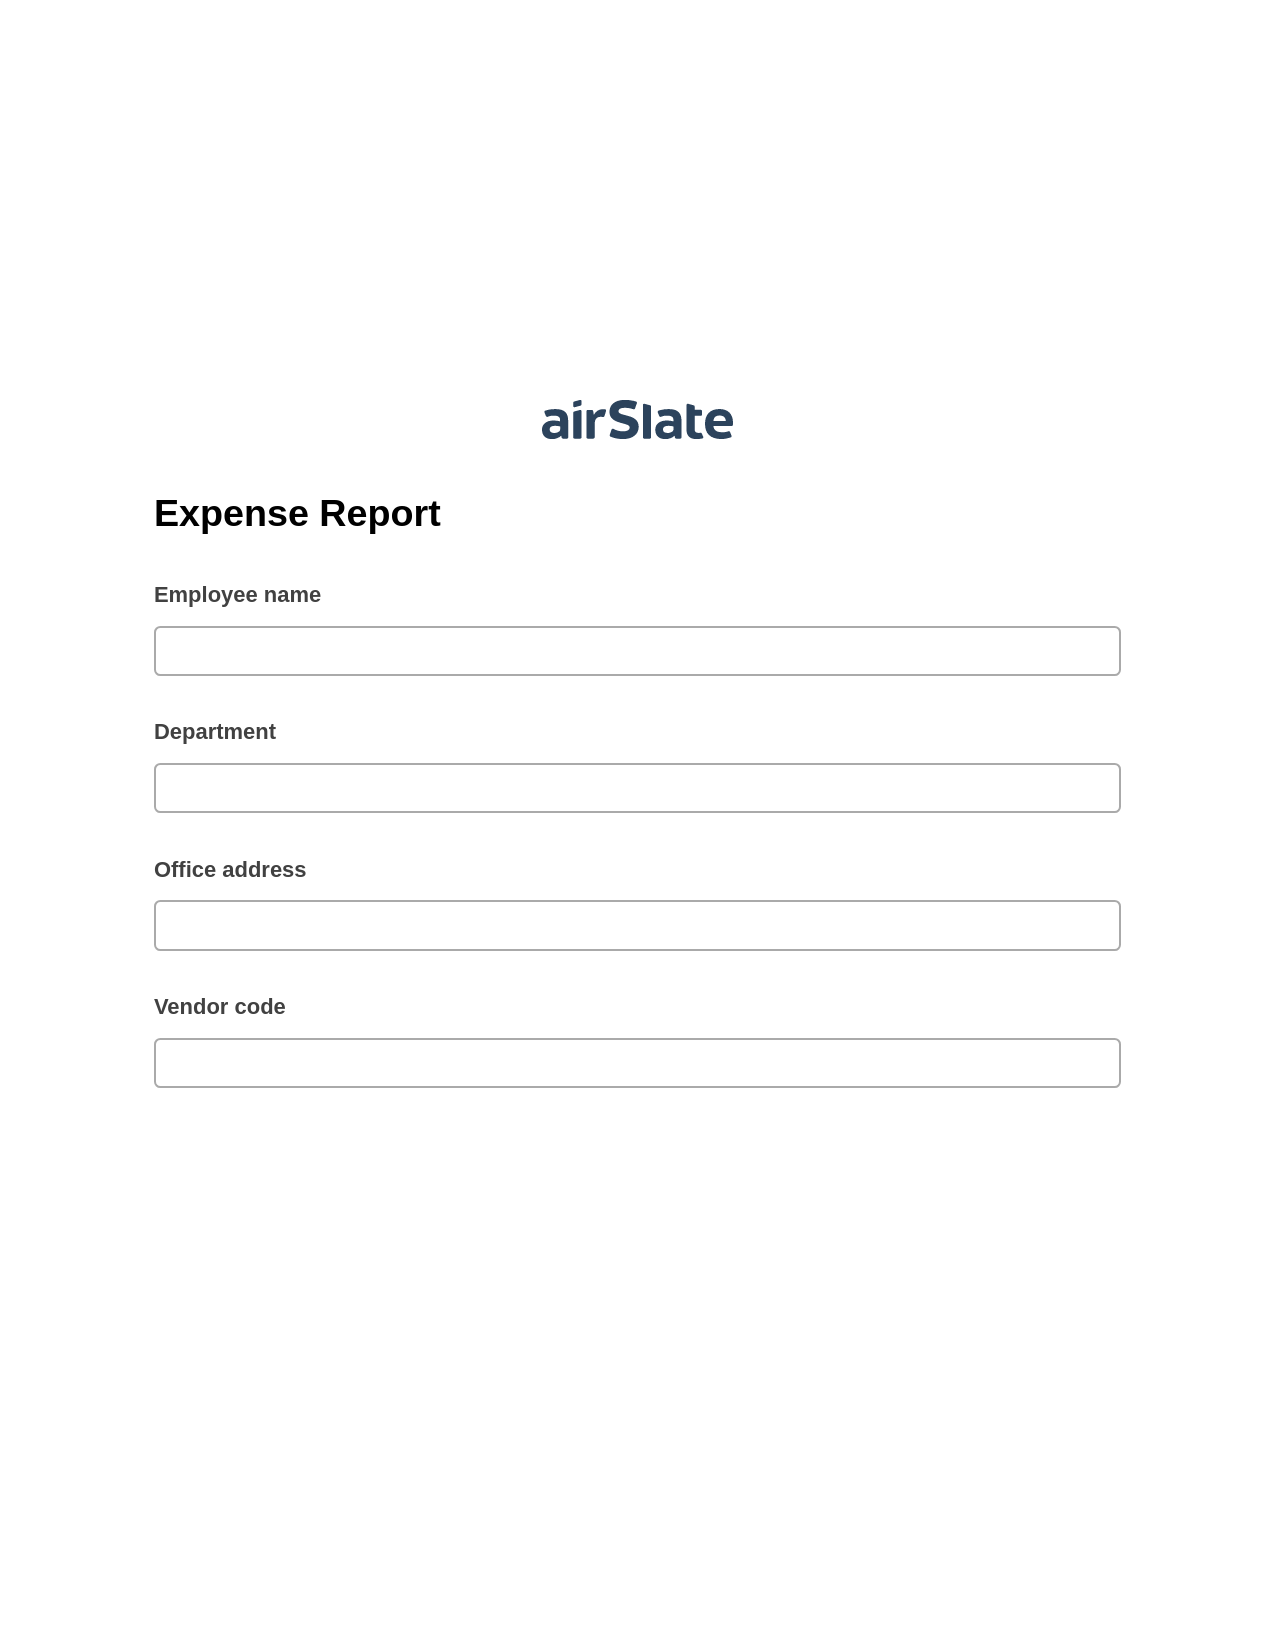 Multirole Expense Report Pre-fill Dropdowns from CSV File Bot, Update MS Dynamics 365 Records Bot, Archive to SharePoint Folder Bot